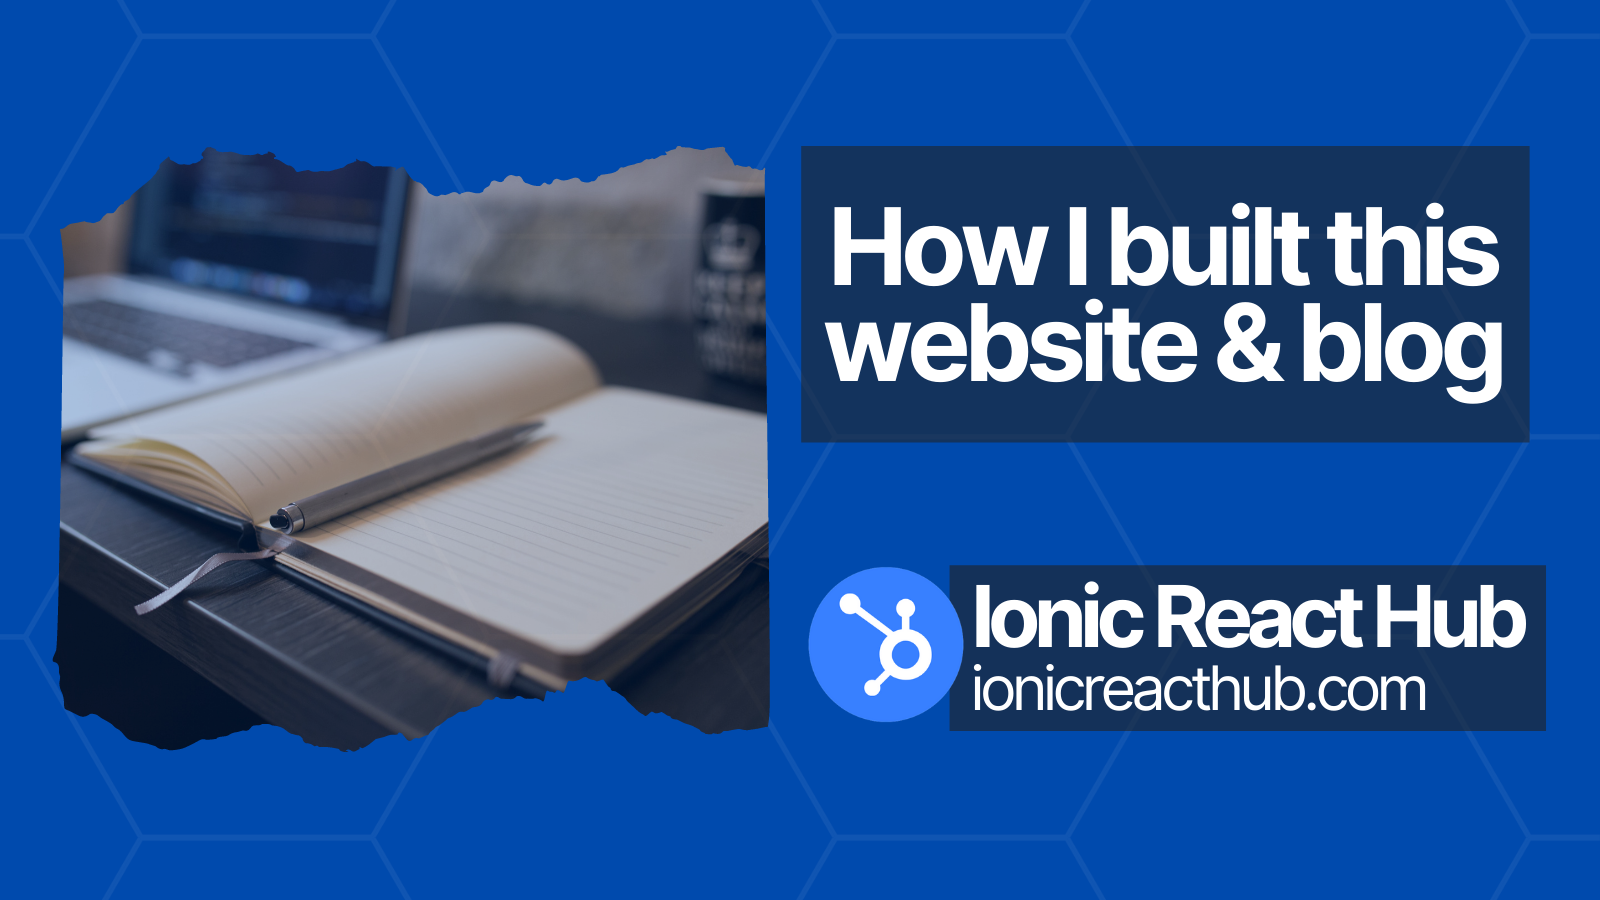 Ionic React Hub Blog - How I built this website and blog